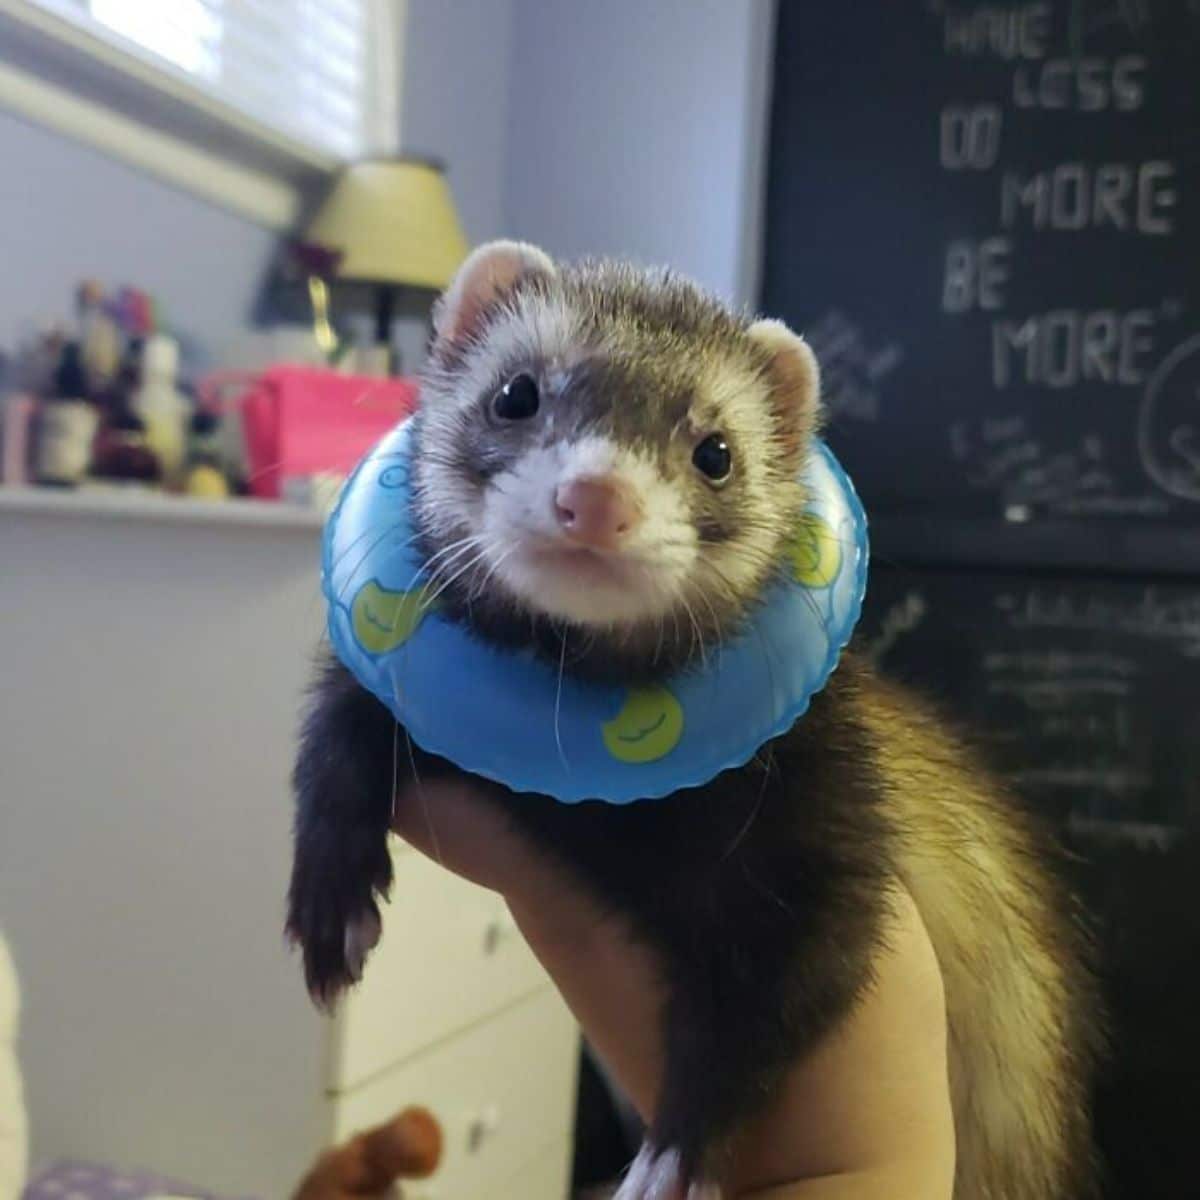 black brown and white ferret being held up wearing a blue float around the neck with yellow ducks on it